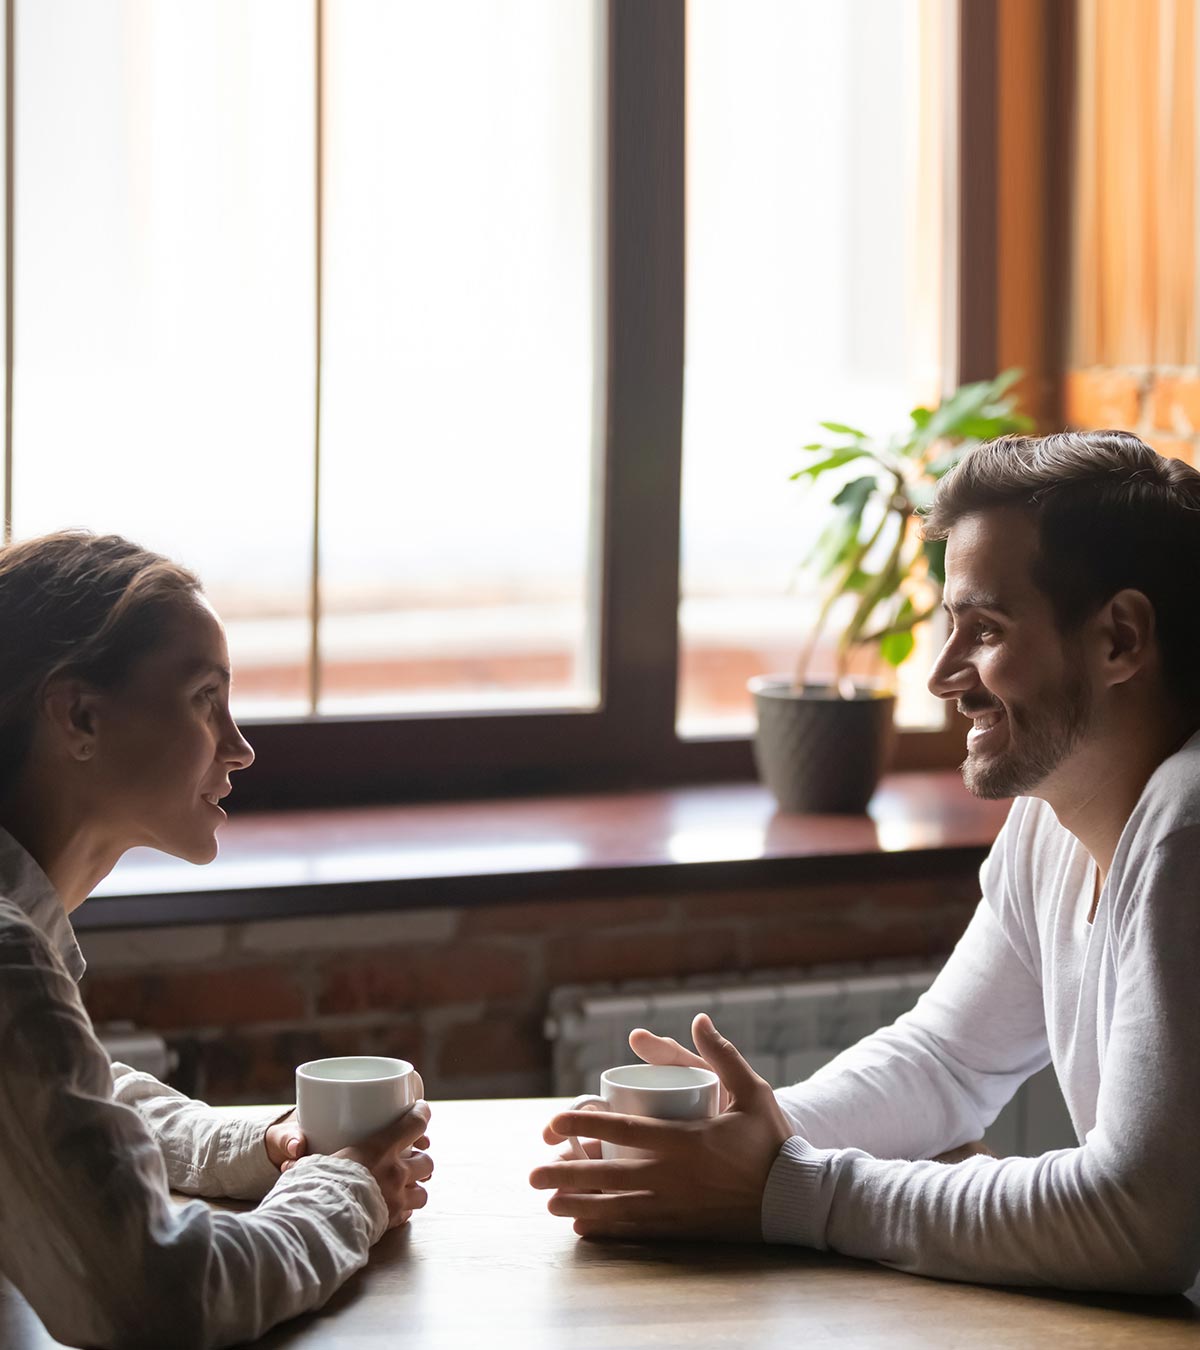 250+ Funny And Interesting Speed Dating Questions To Ask